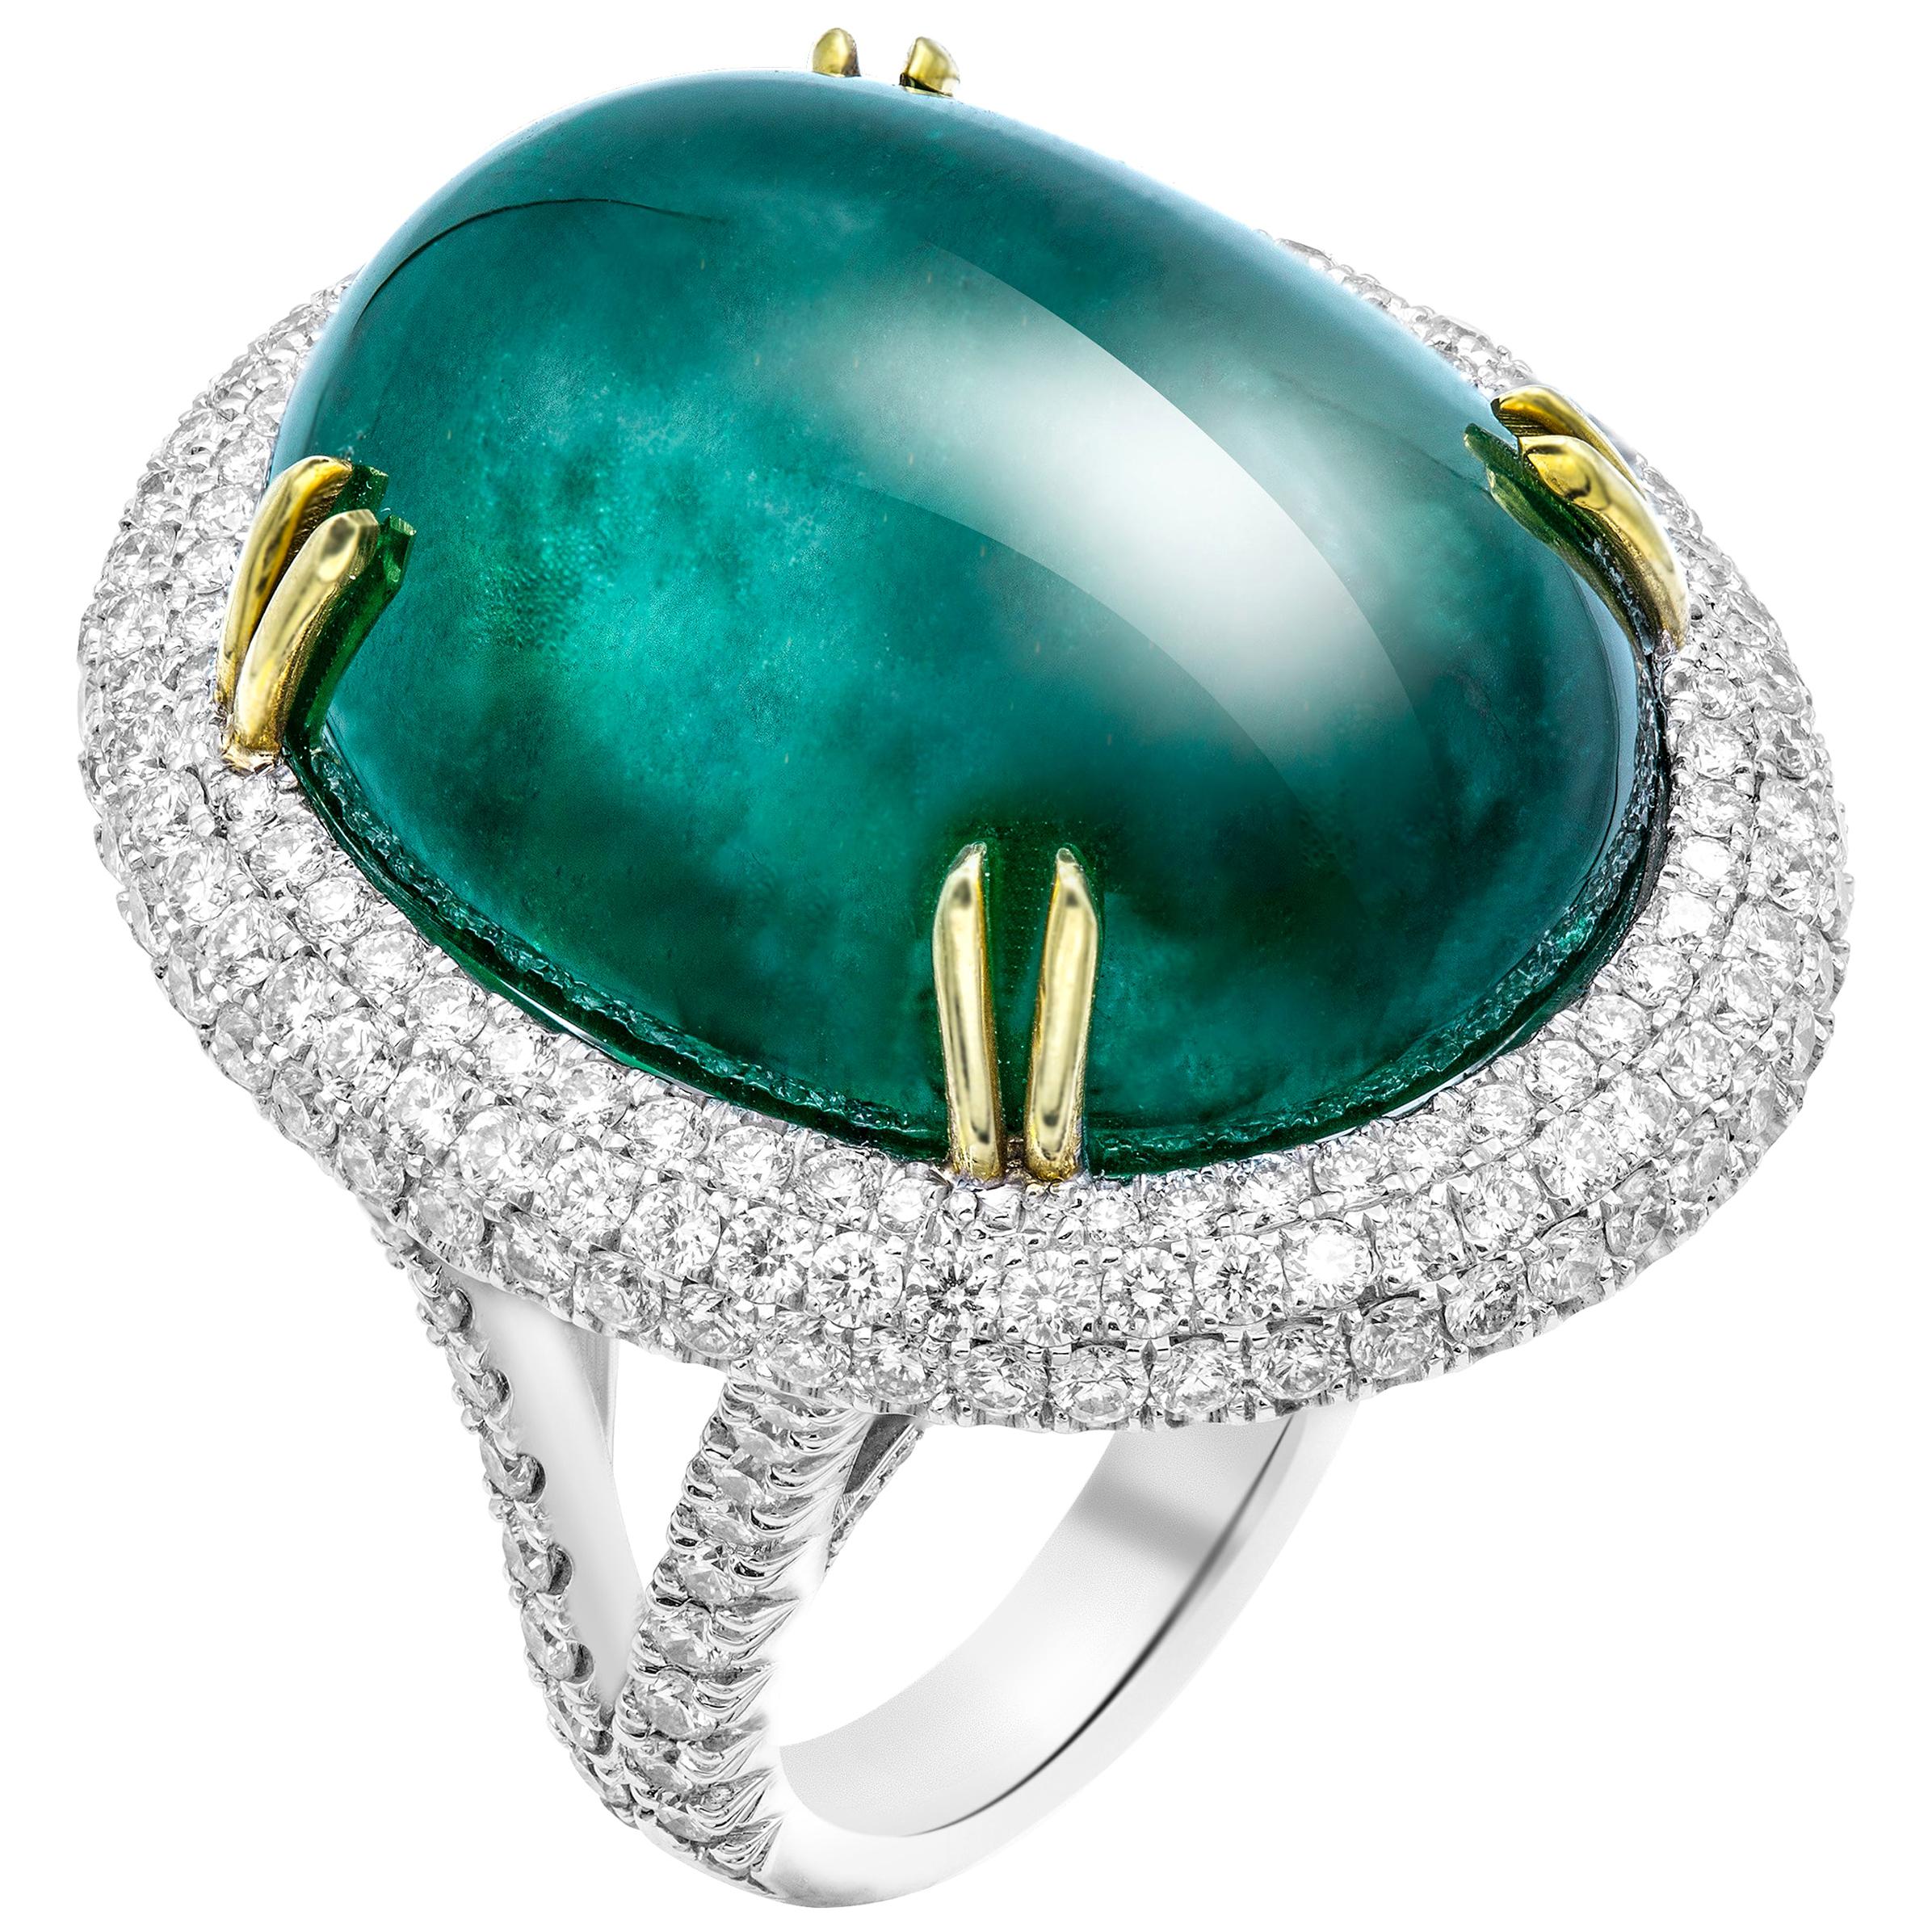 GIA Certified 50.6 Carat Oval Emerald Cabochon Diamond Cocktail Ring For Sale